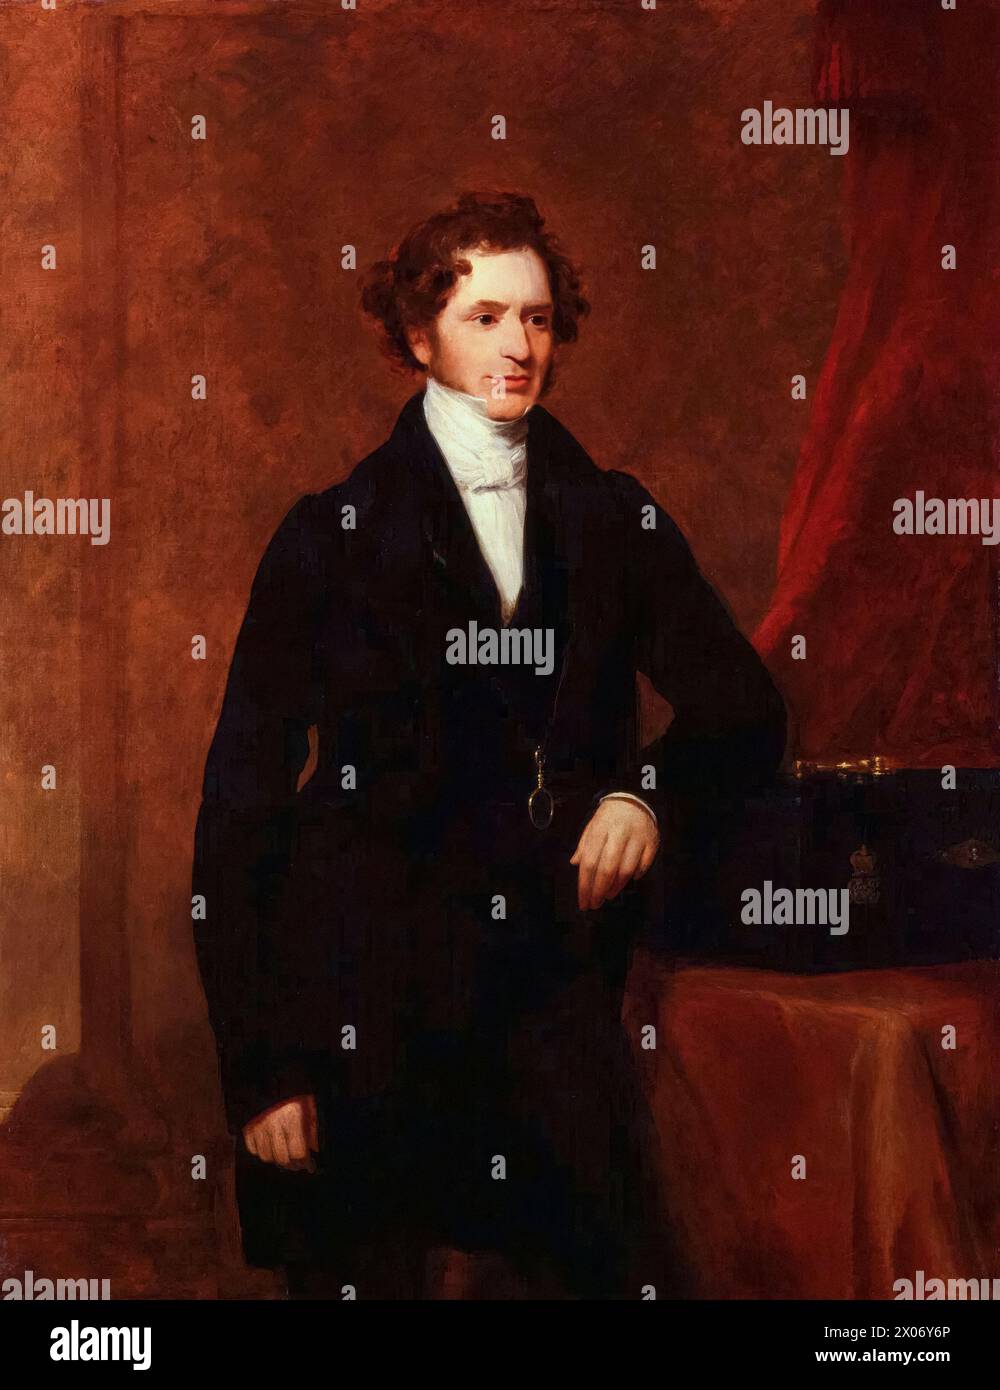 Edward Smith-Stanley, 14th Earl of Derby (1799-1869), known as 'Lord Stanley', served three times as Prime Minister of the United Kingdom 1852, 1858-1859, and 1866-1868, portrait painting in oil on canvas by Frederick Richard Say, 1844 Stock Photo